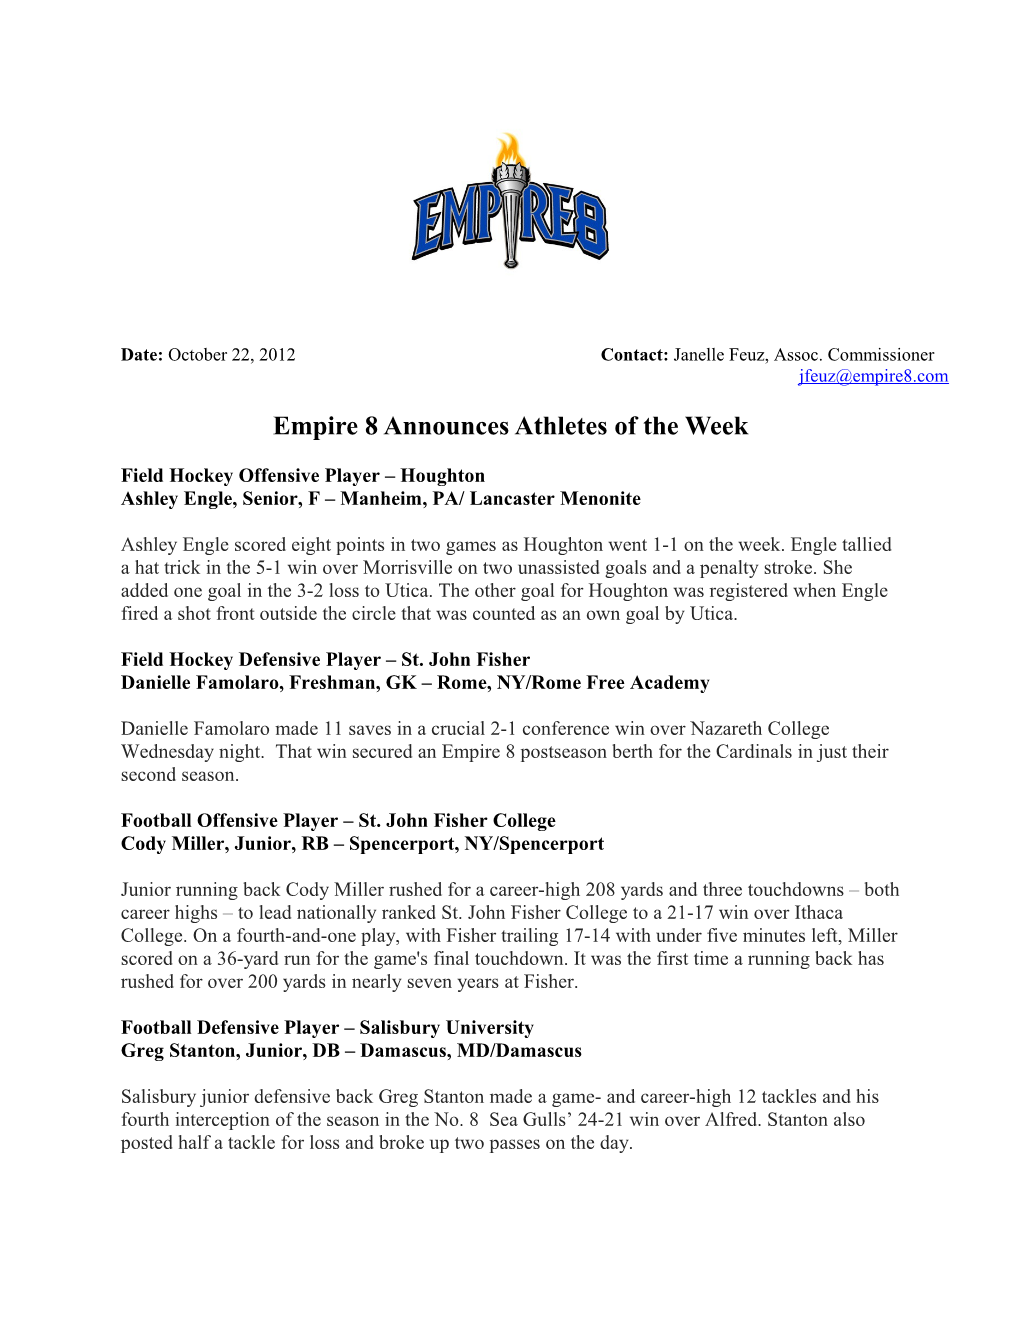 Empire 8 Announces Athletes of the Week